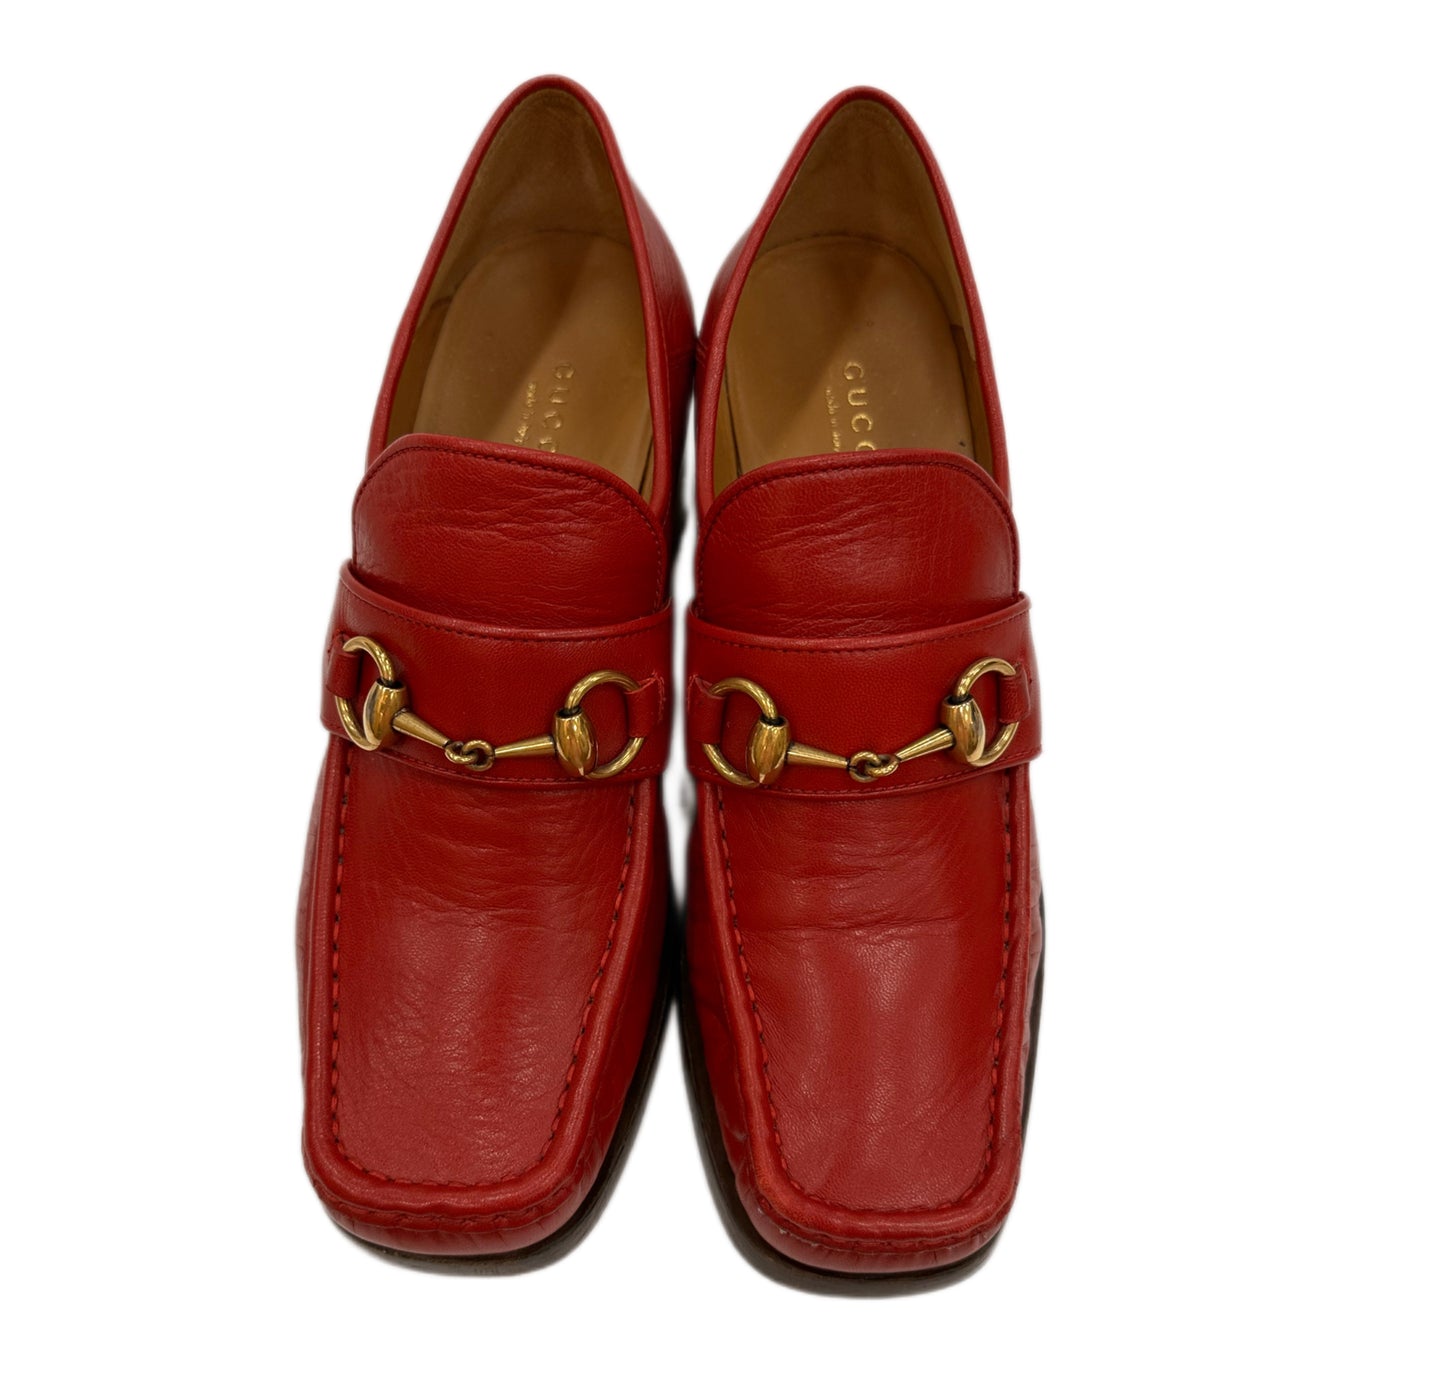 GUCCI Horsebit Loafers Red Size 38